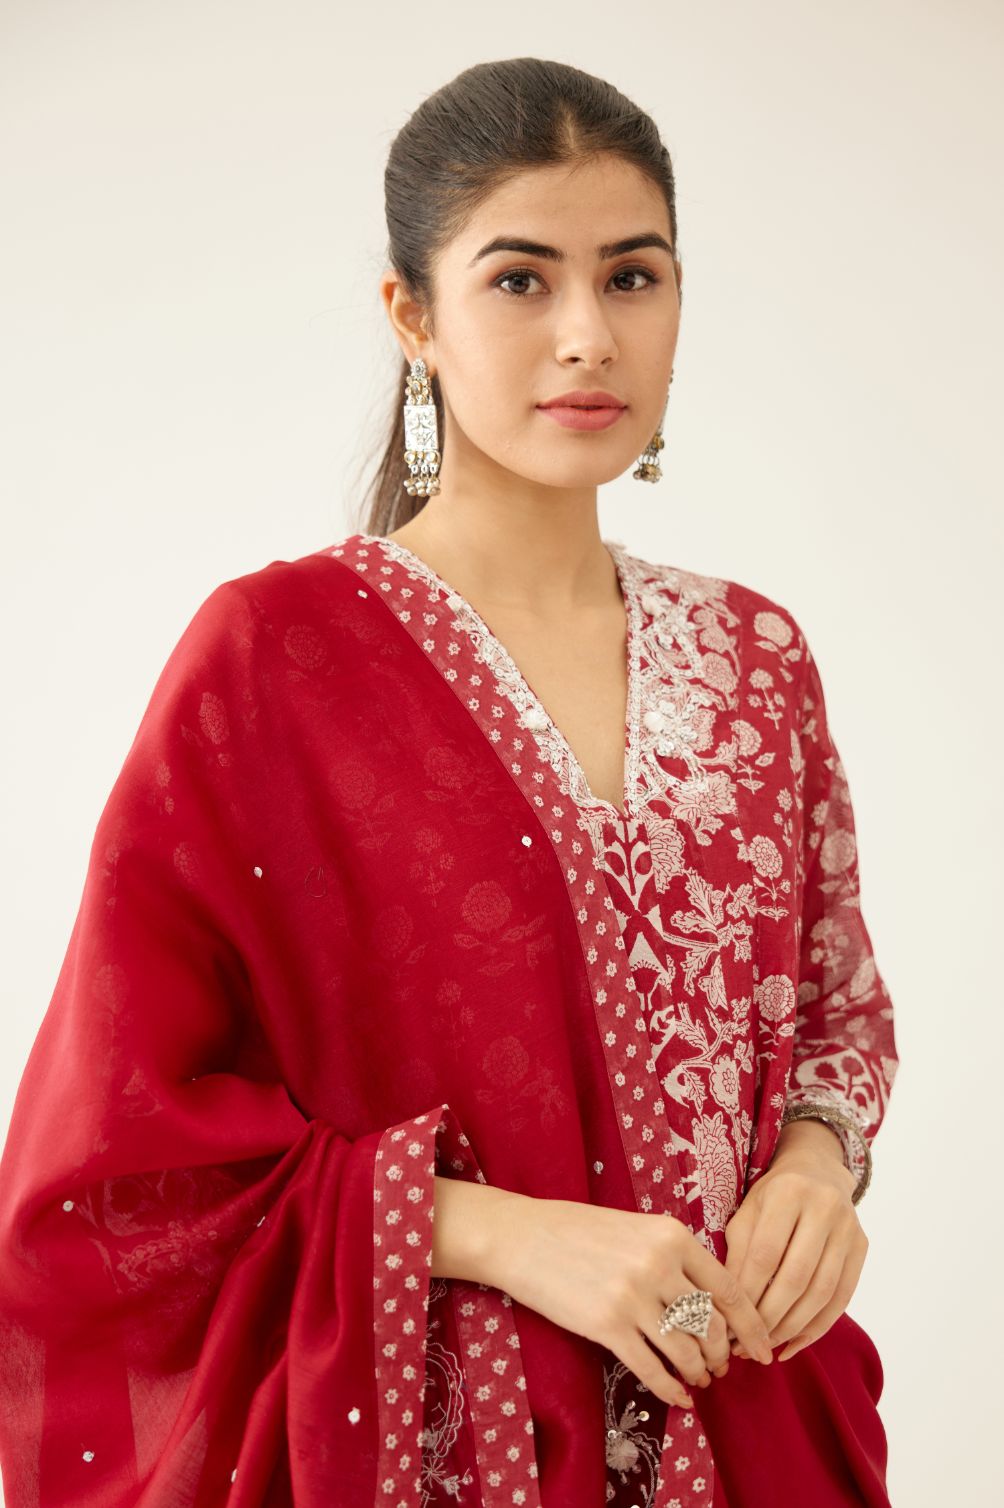 Red silk chanderi dupatta highlighted with sequin, tassels and bead work boota at corners and printed border running along all edges.